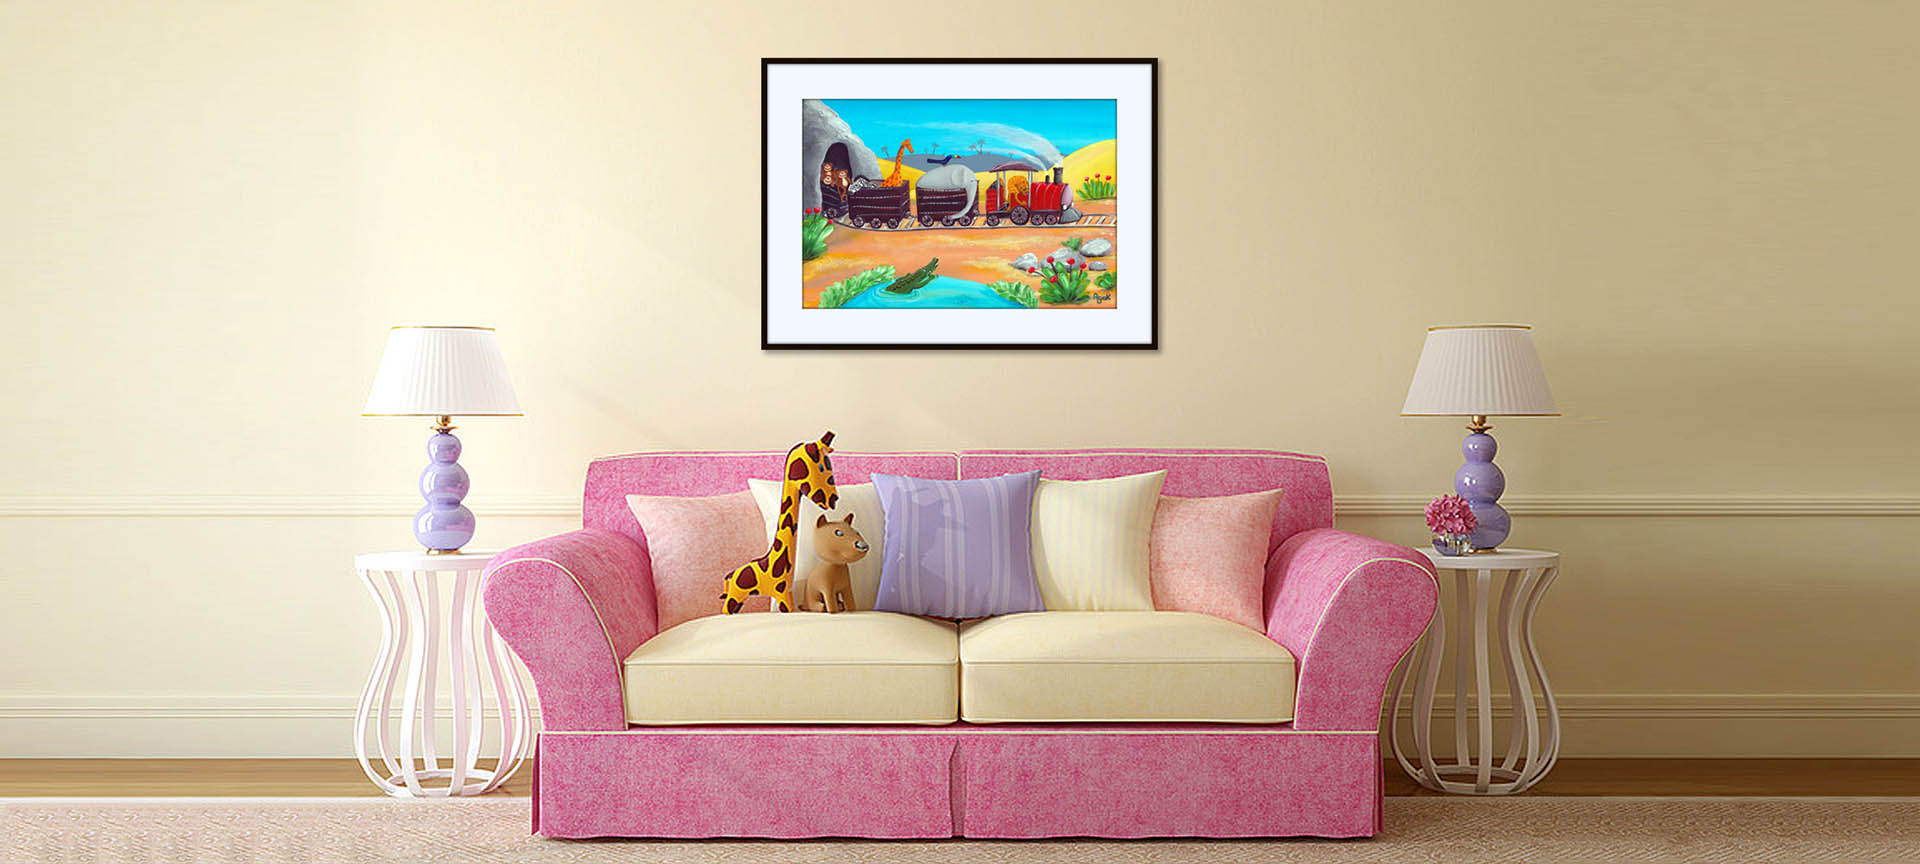 Jungle animals picture above a red sofa.